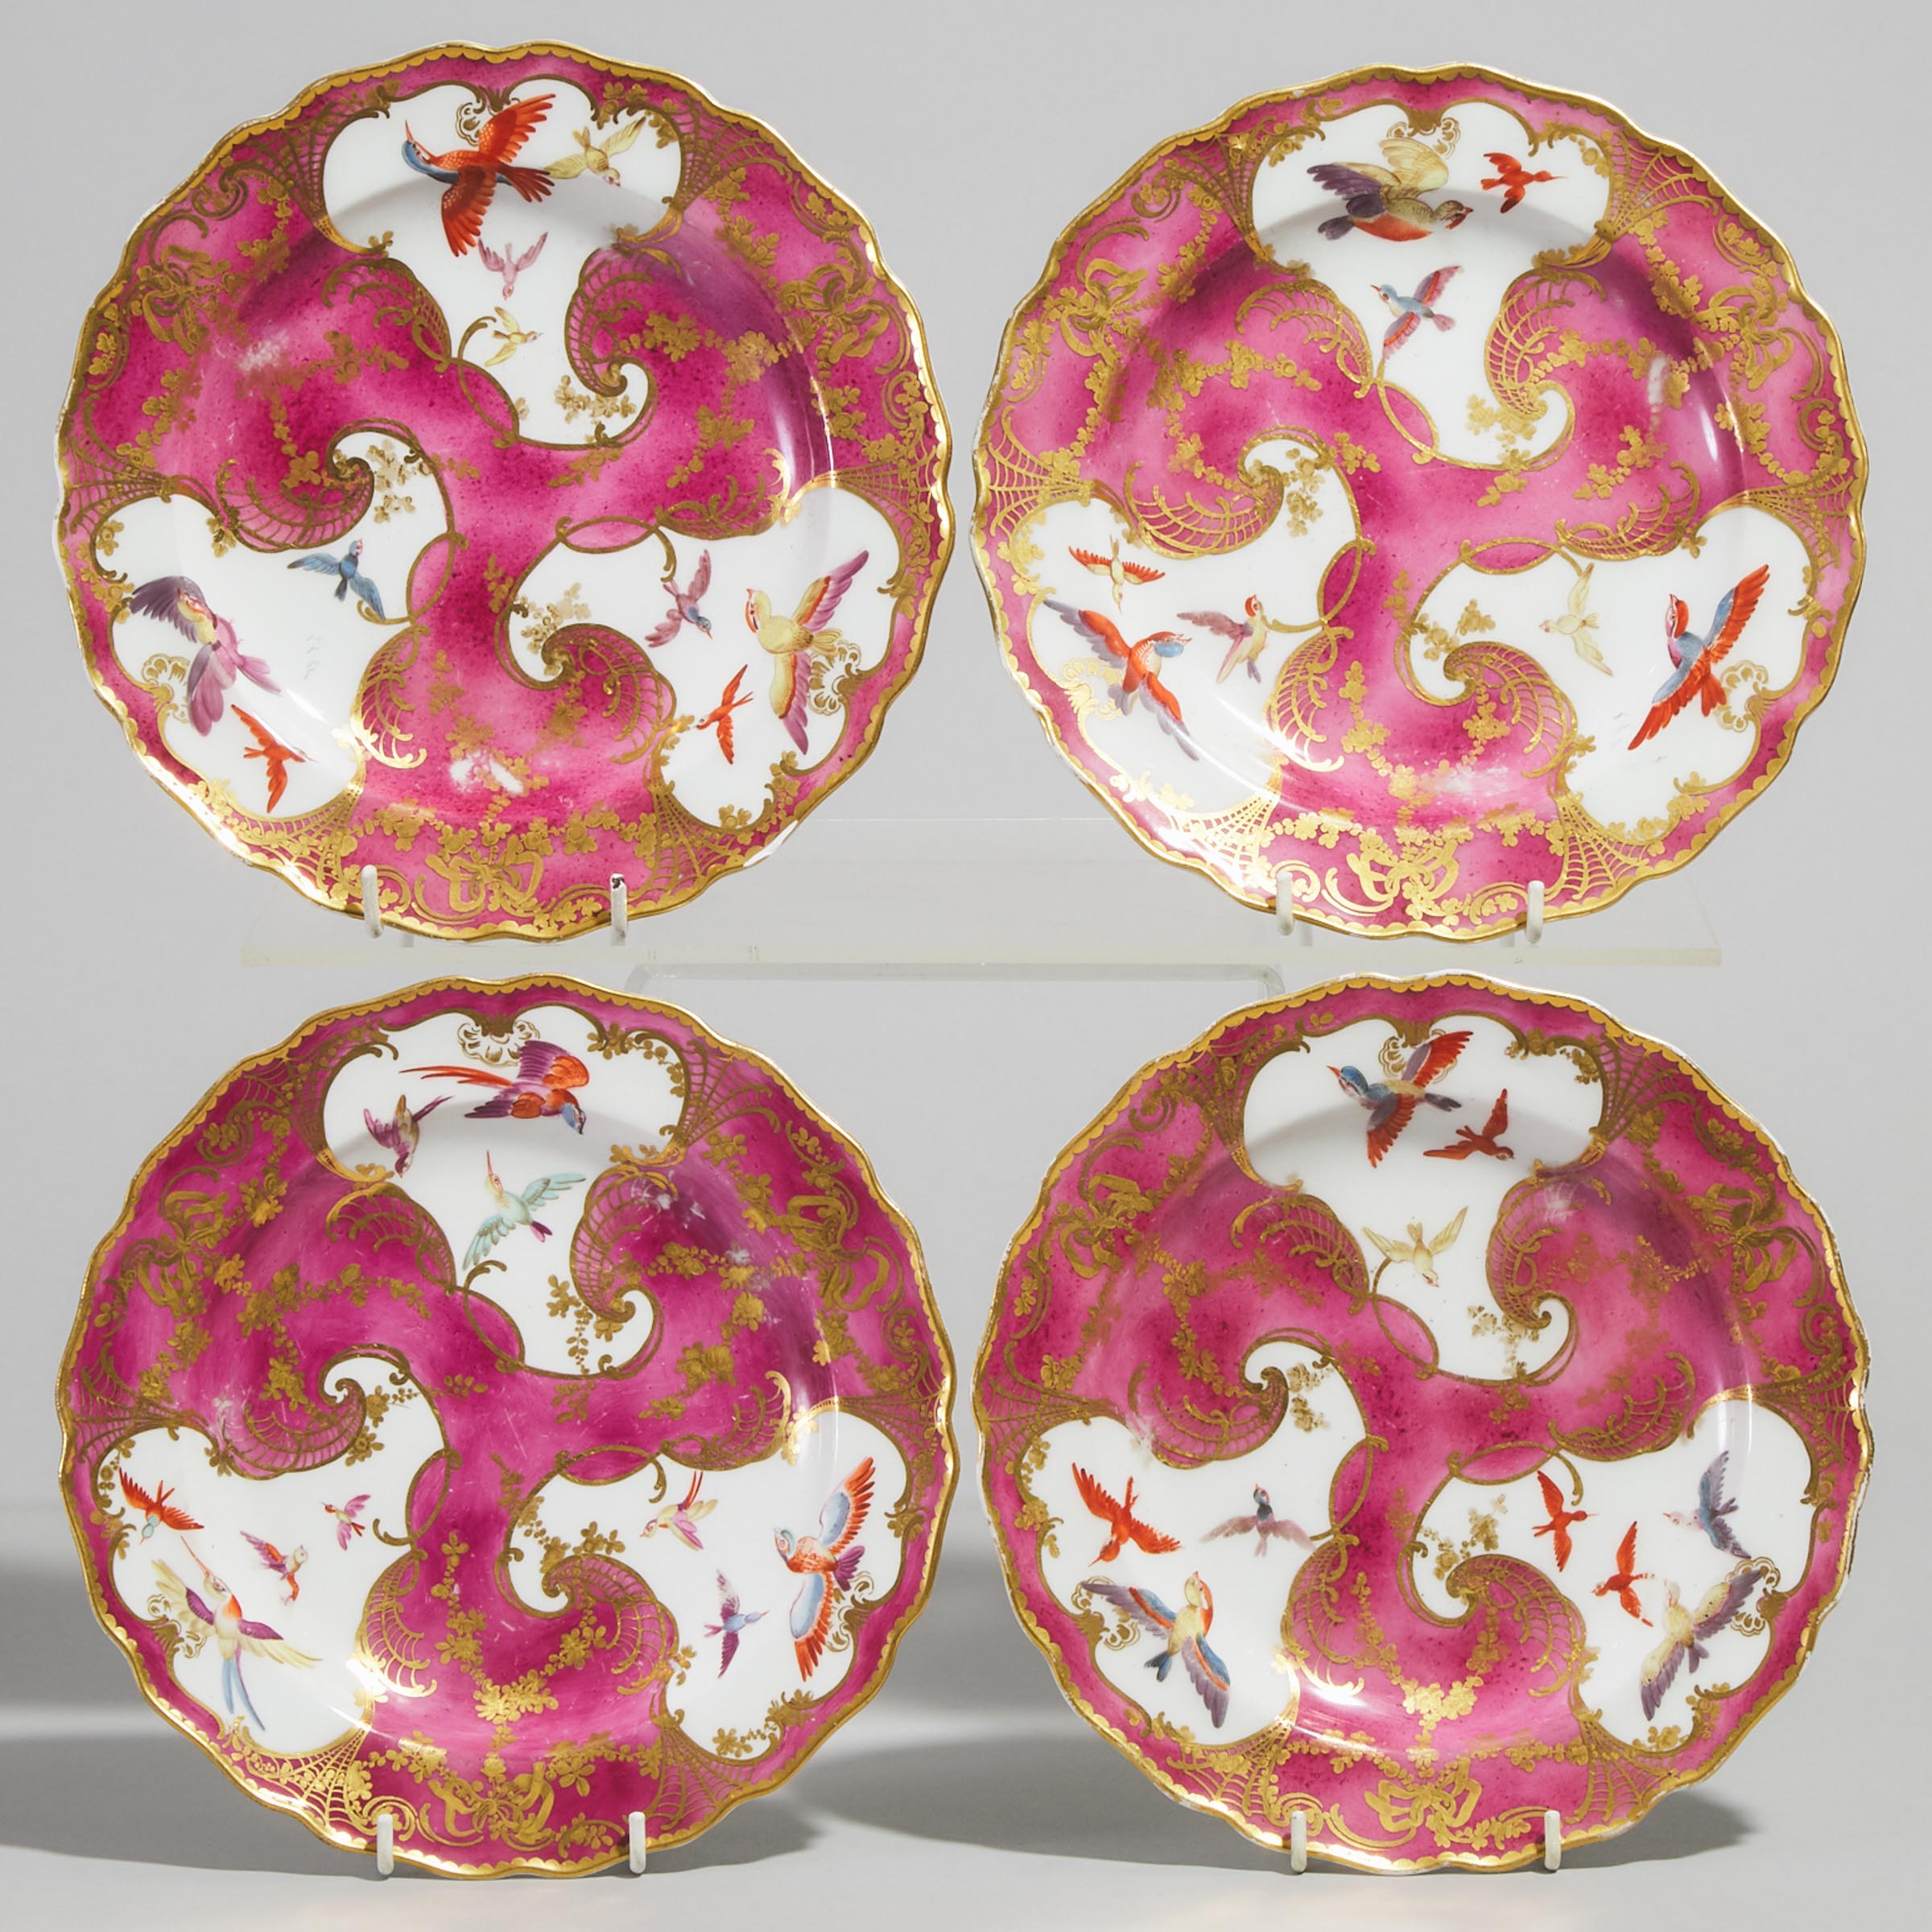 Four Chelsea Claret and Gilt Ground Plates, c.1765